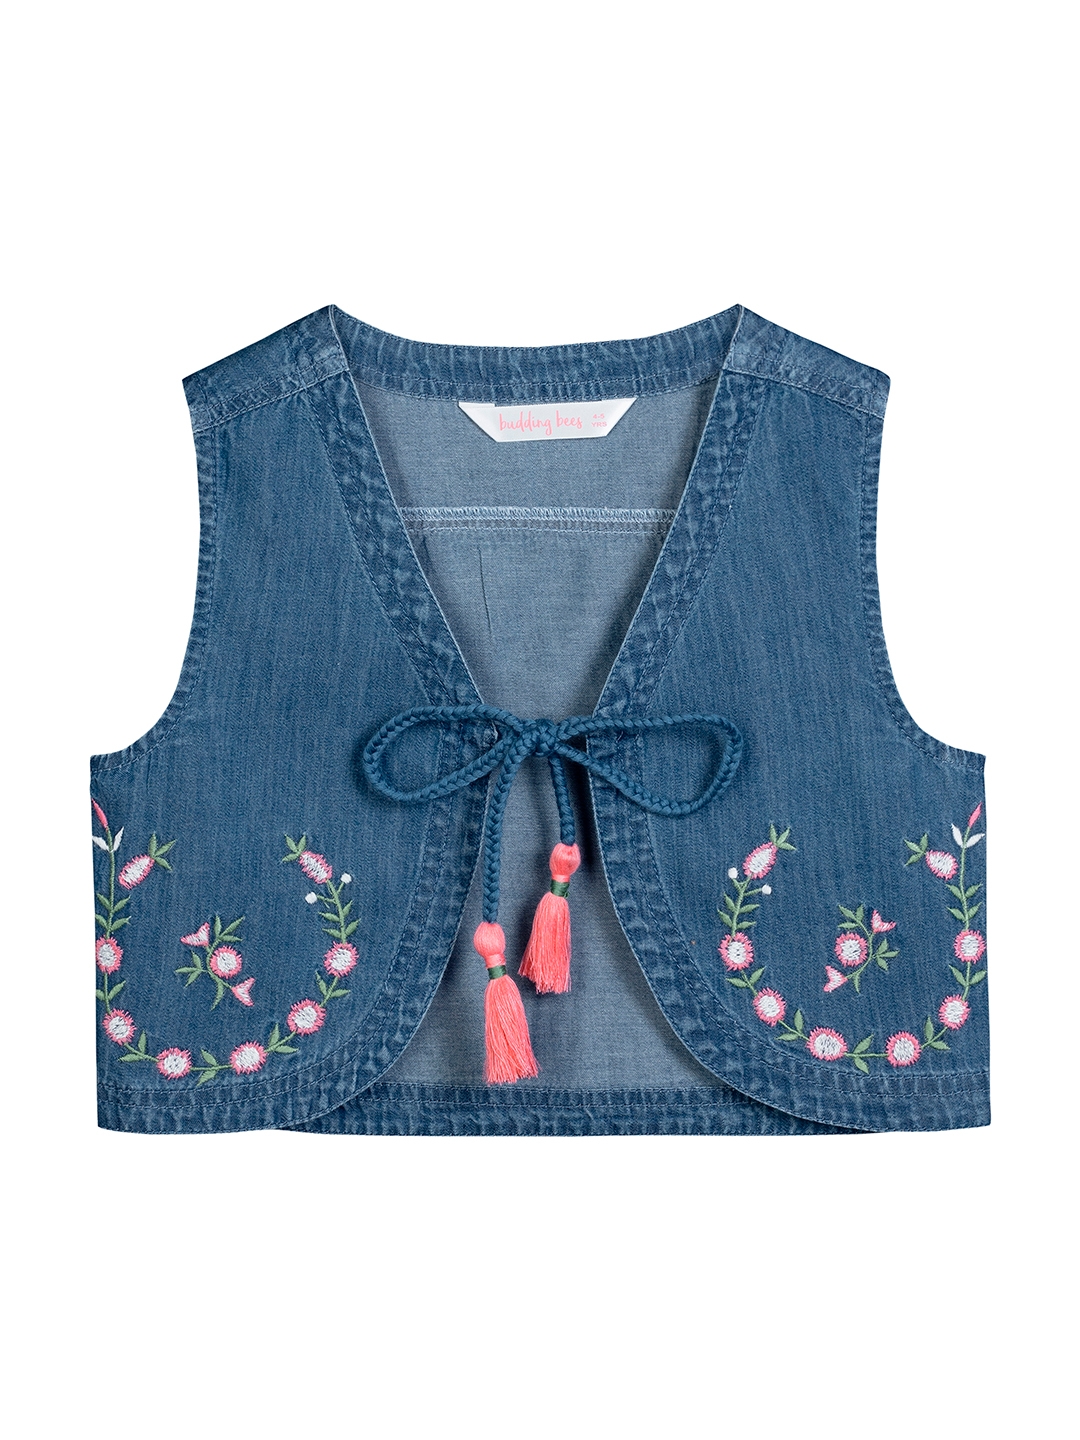 Budding Bees | Blue Embroidered Top